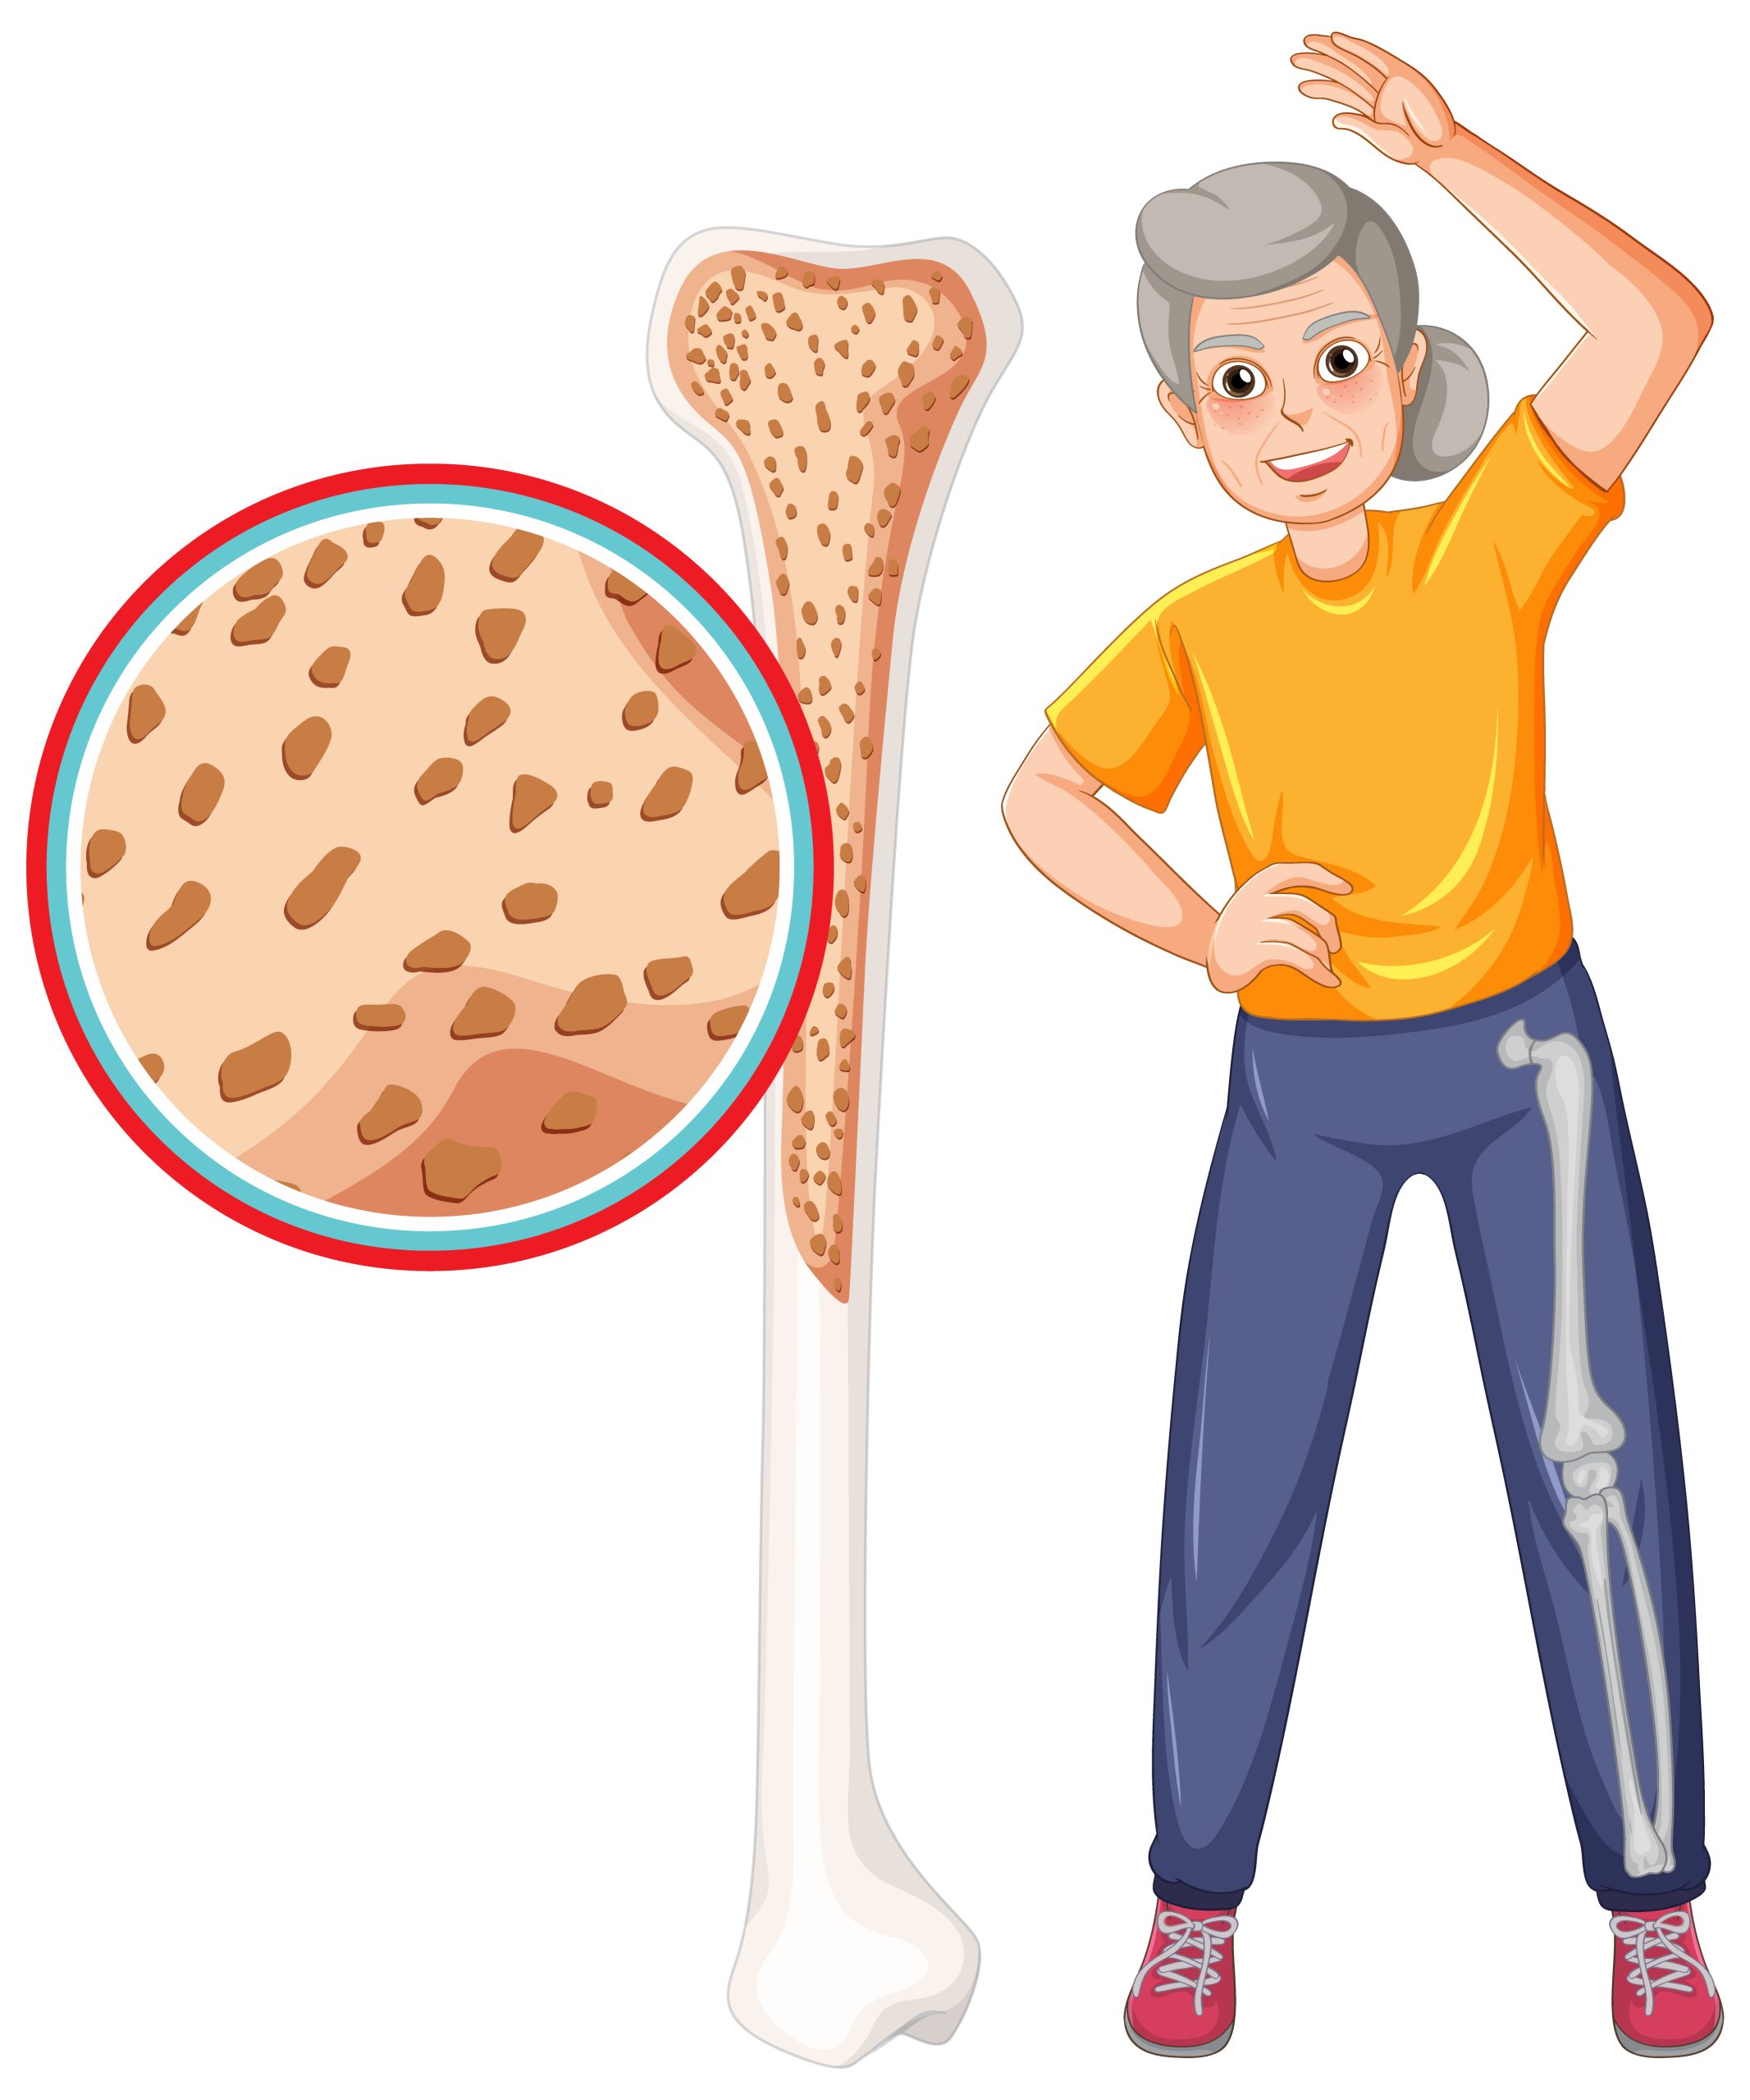 Osteoporosis in old people illustration